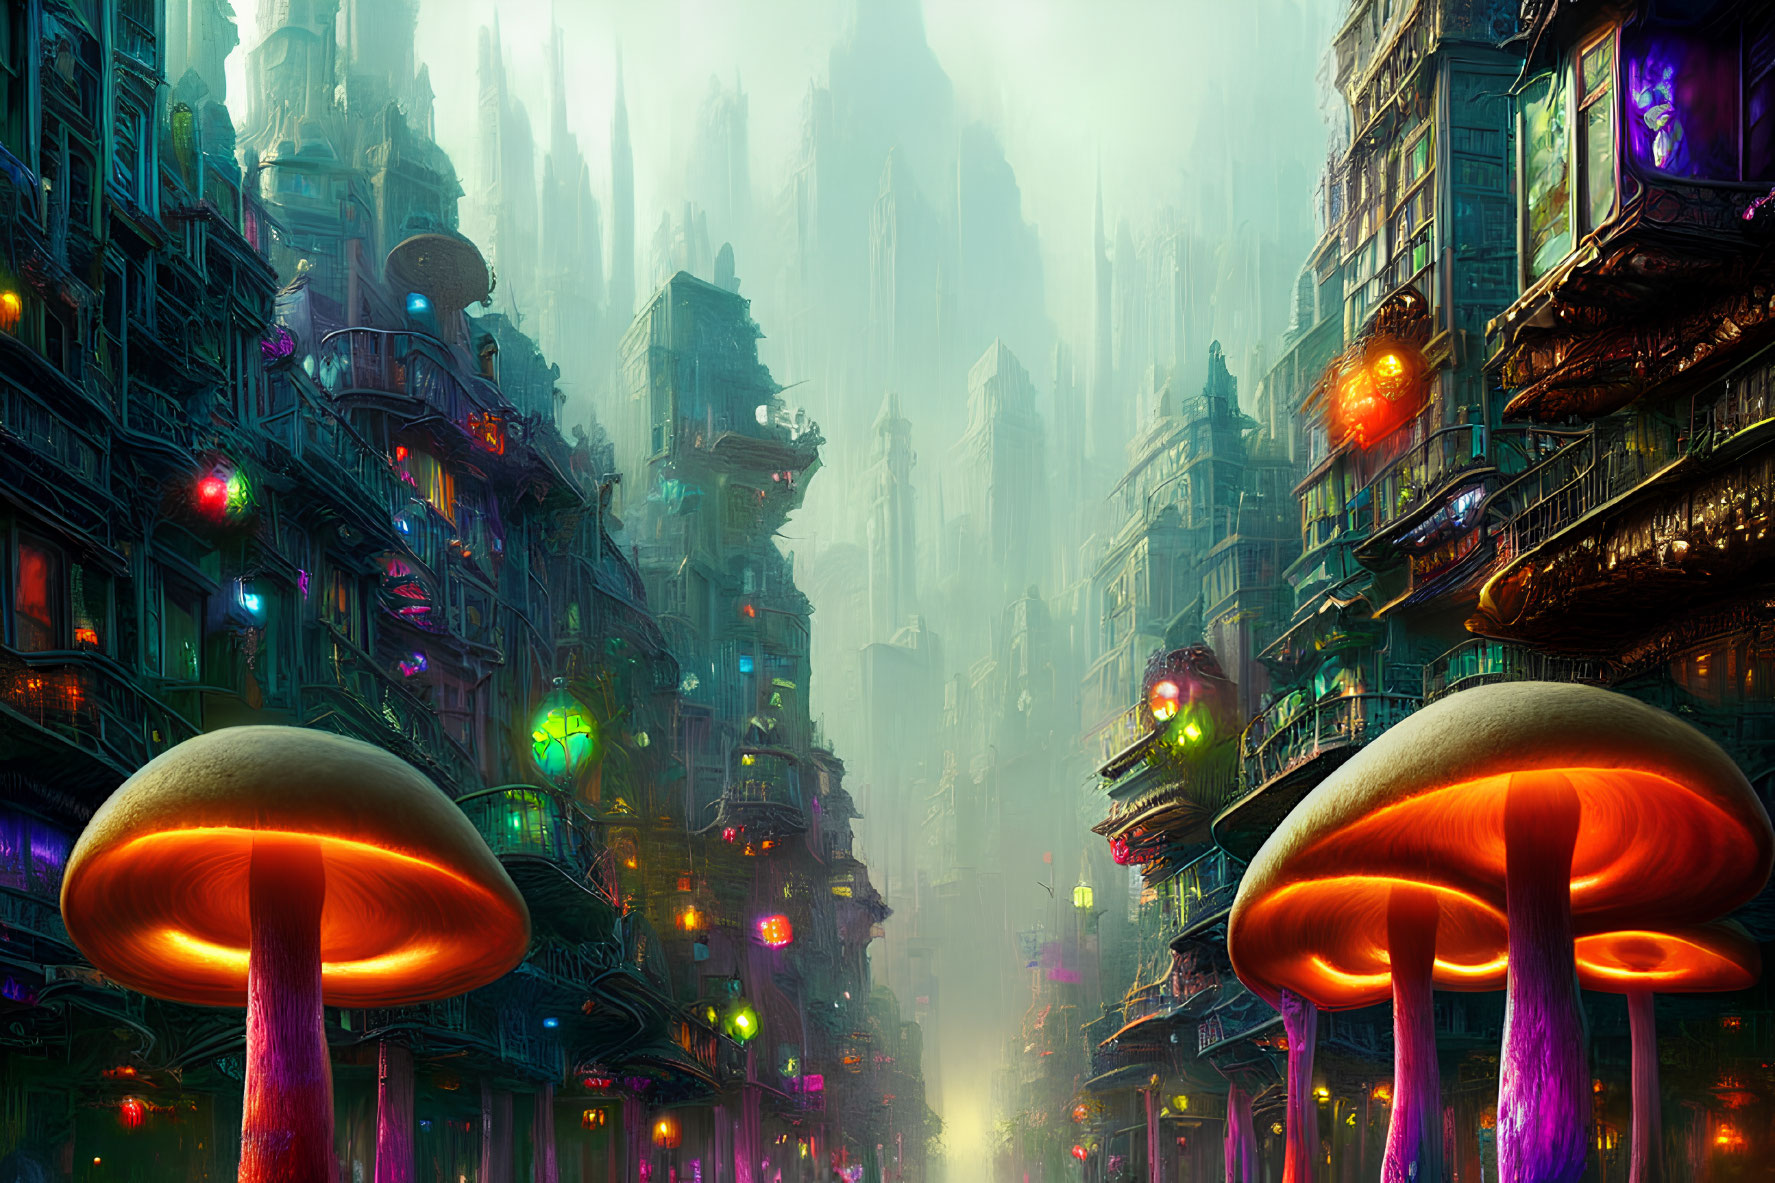 Vibrant futuristic cityscape with neon-lit buildings and oversized mushrooms under a glowing sky